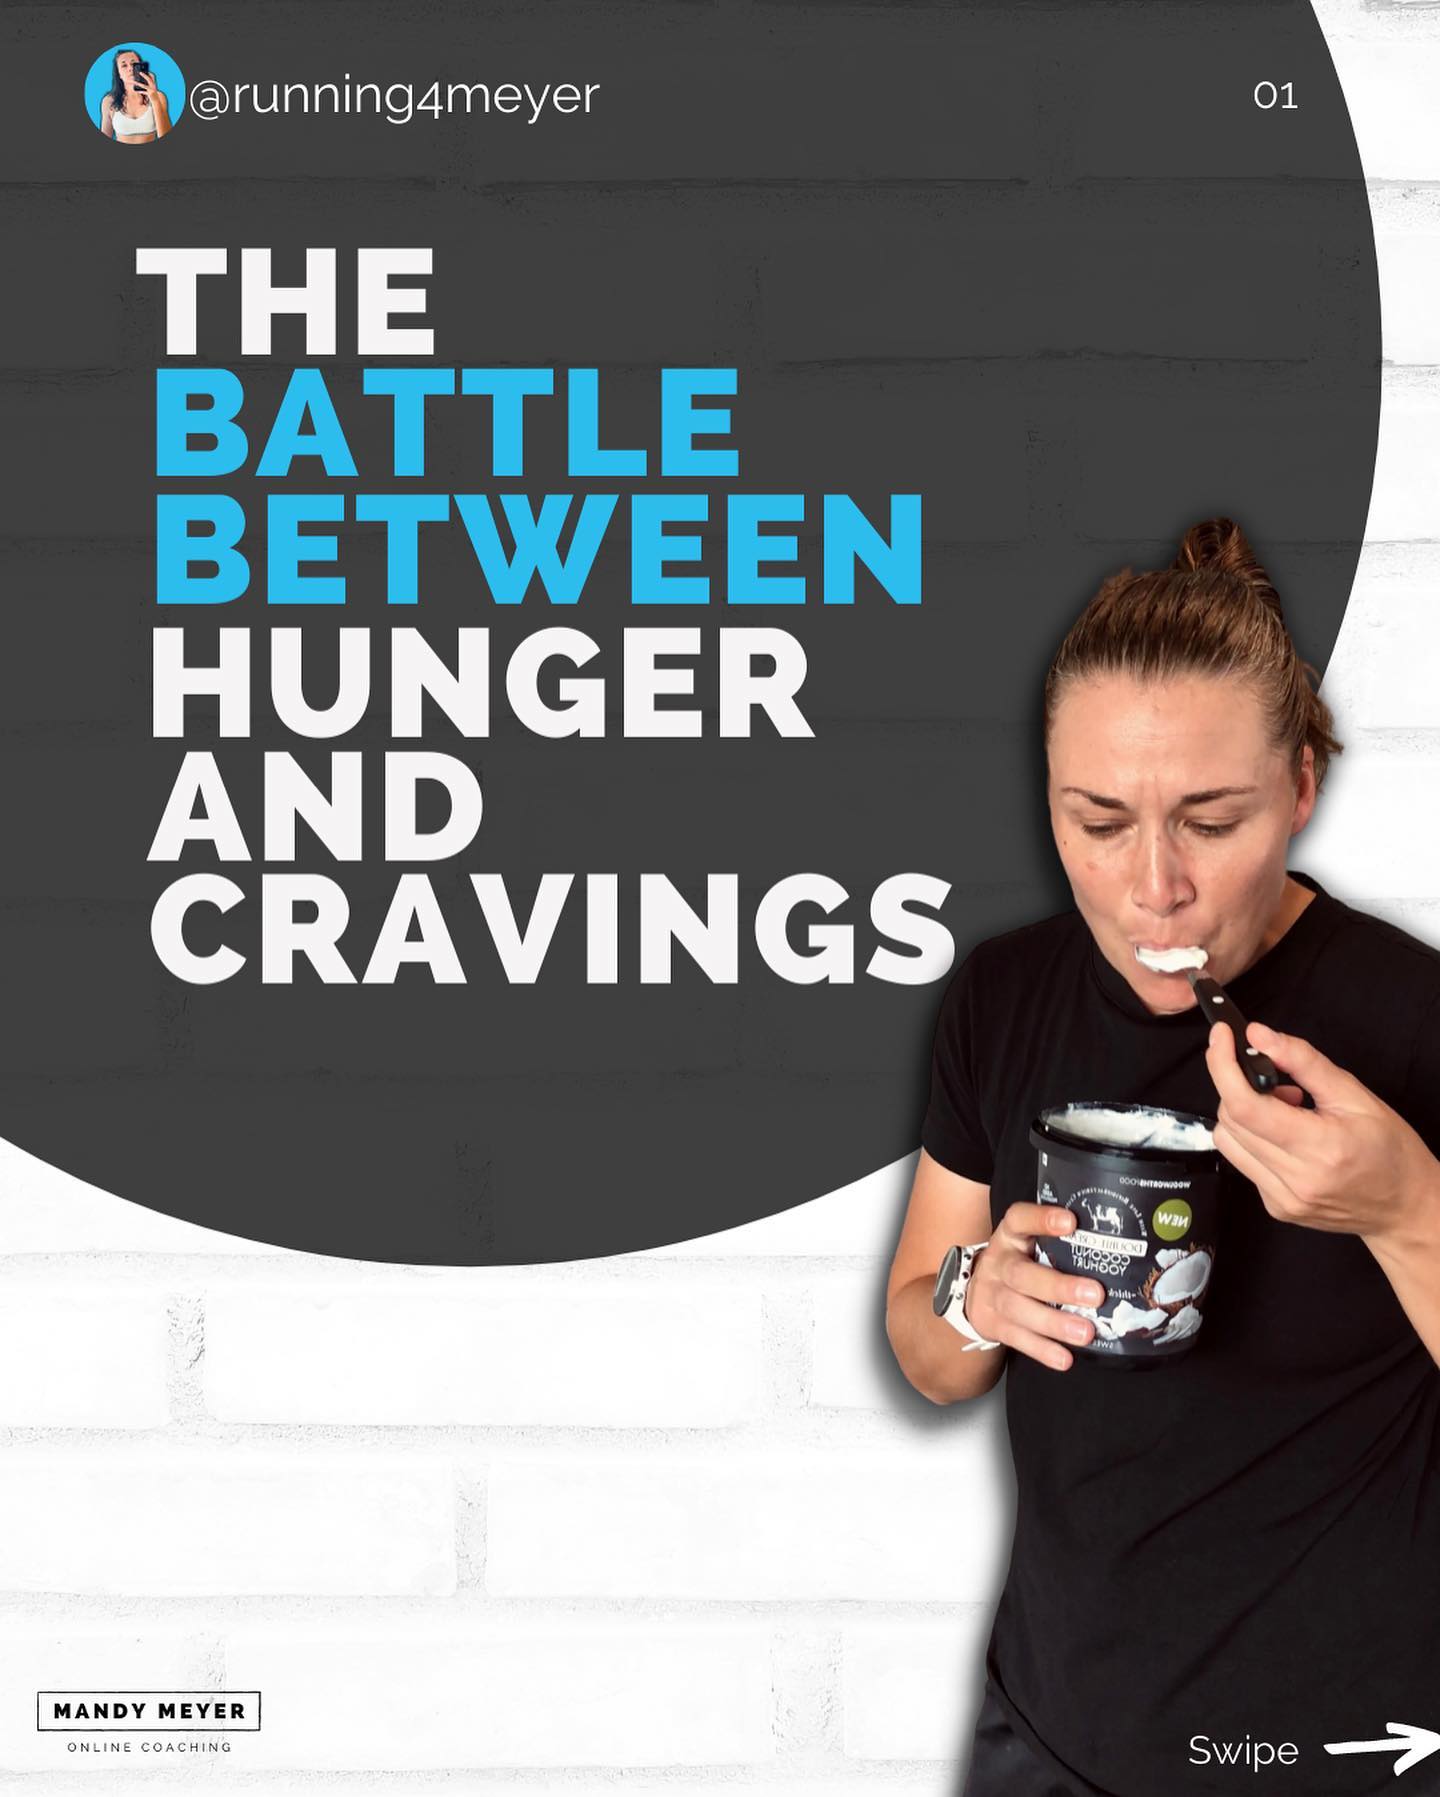 Struggling with Hunger cues & Cravings?

Slide 4 and slide 8 contain some basic …